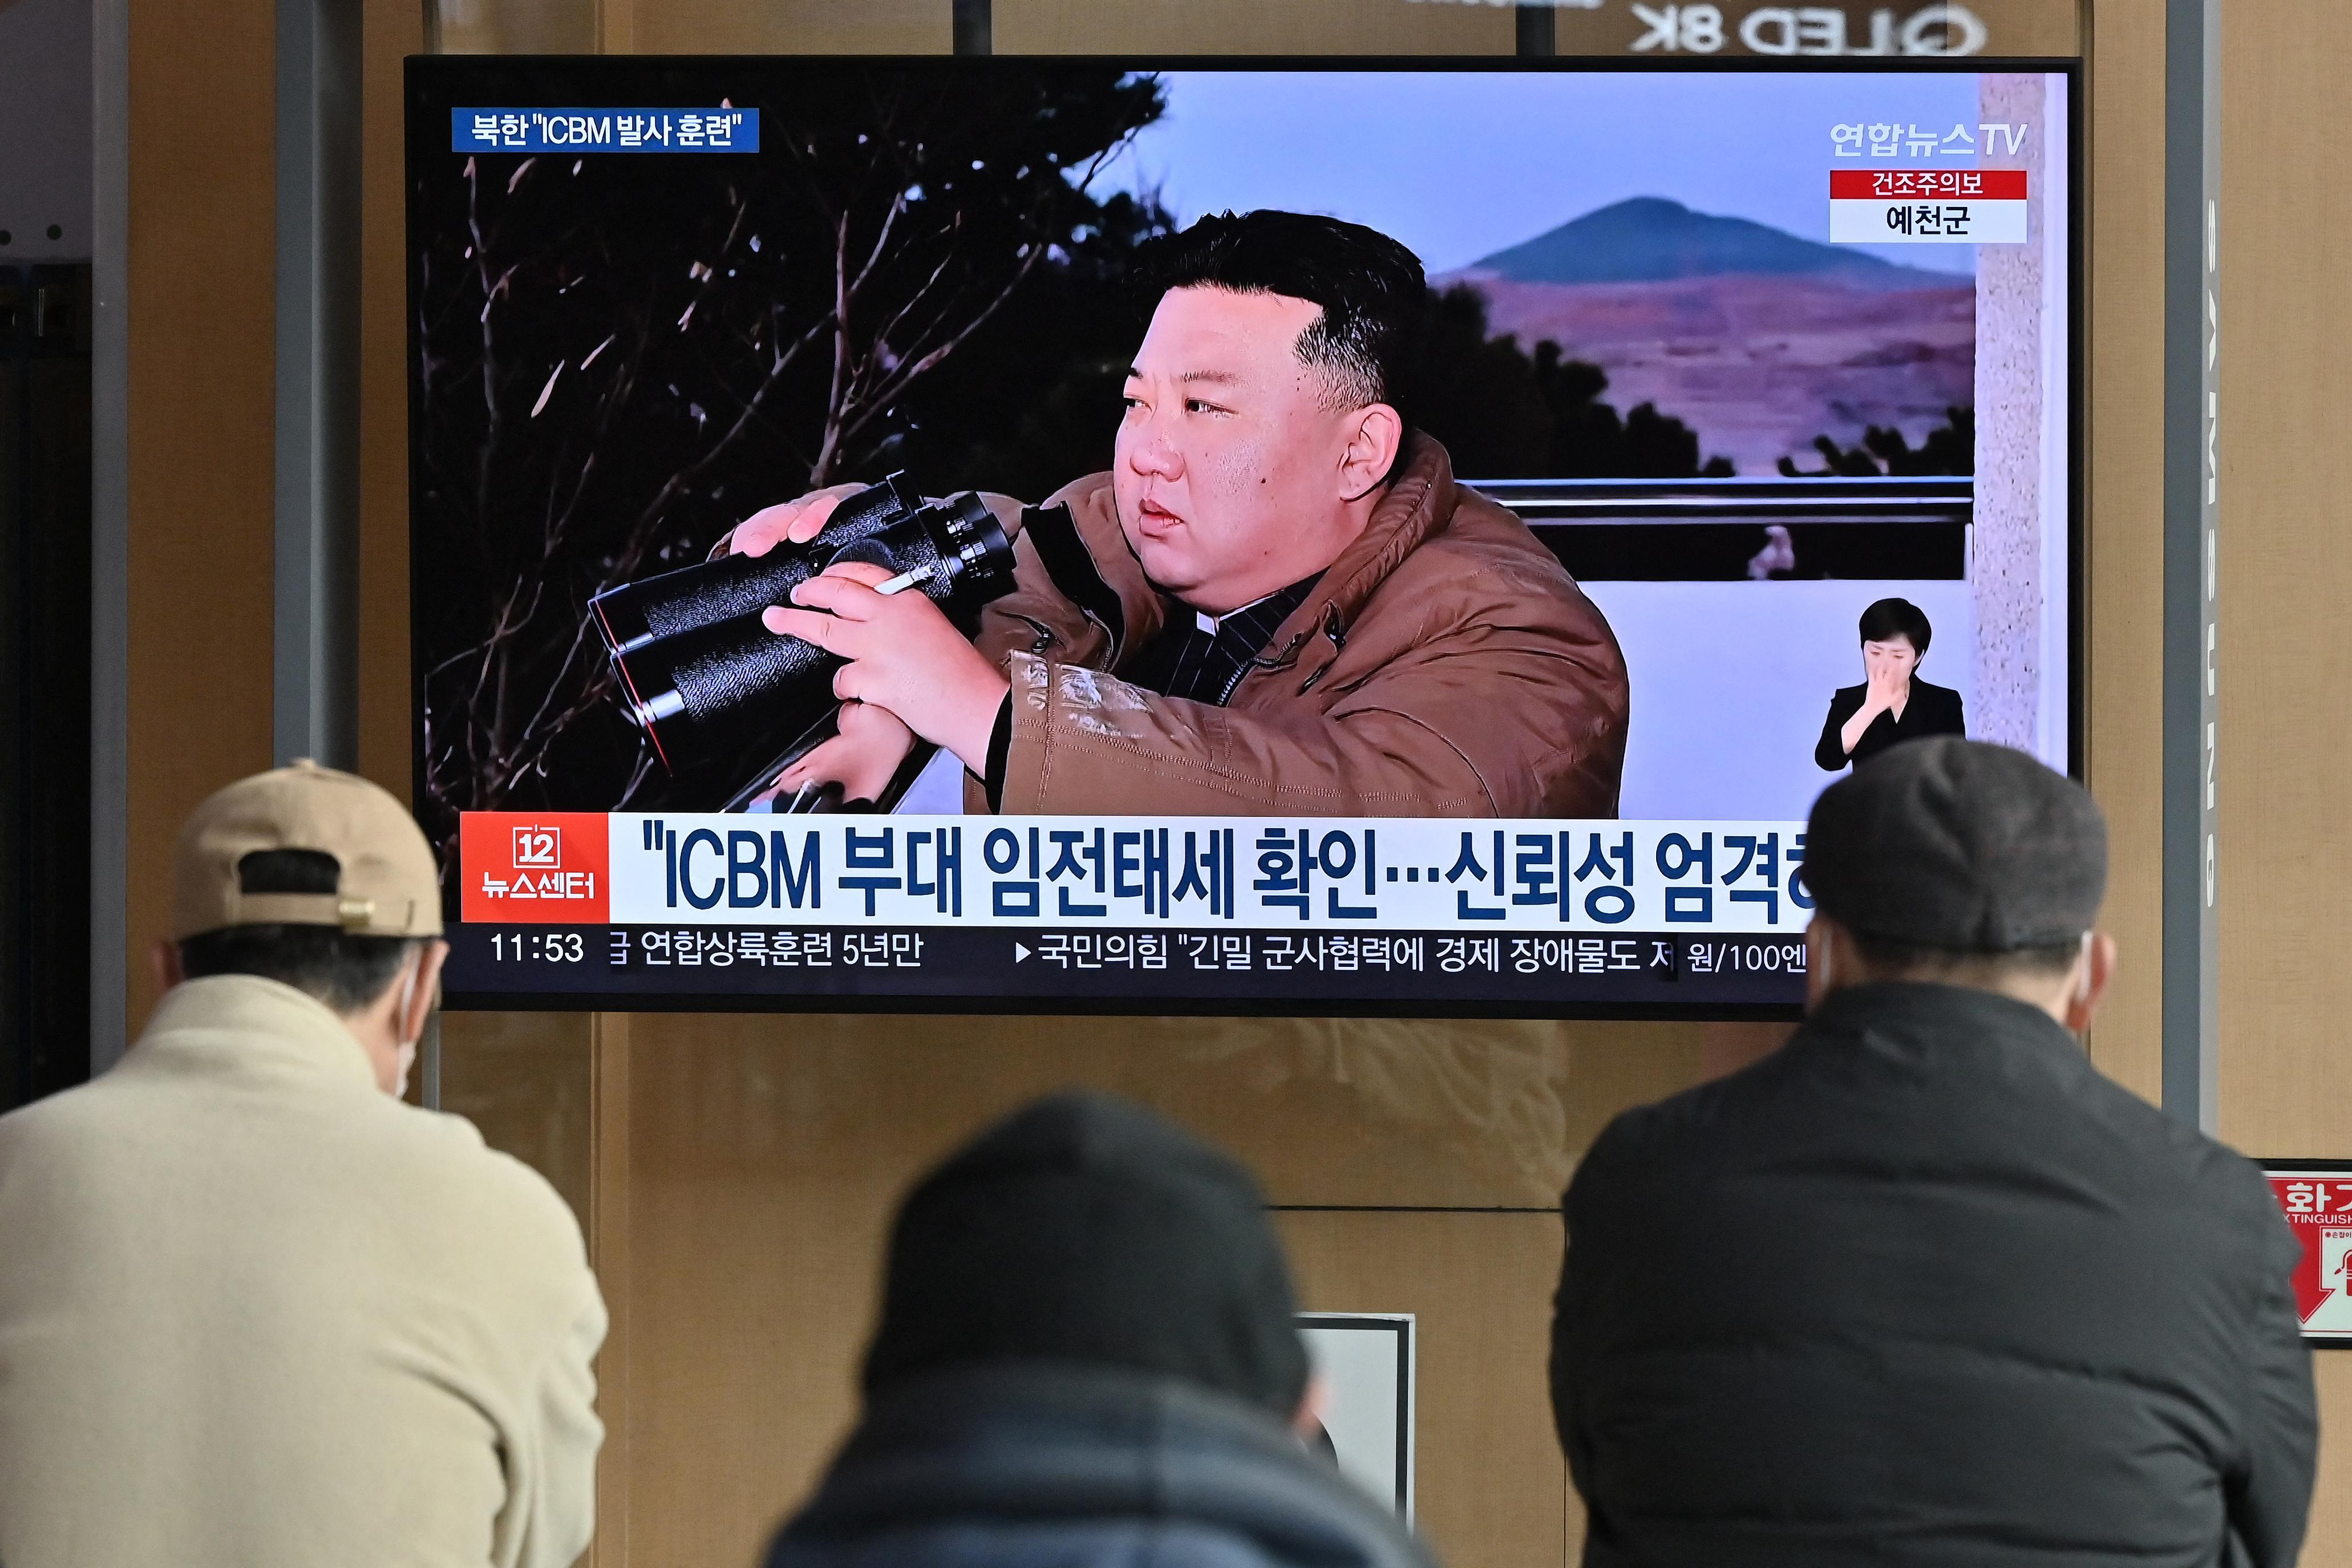 North Korea issues response to military exercises in Washington, Seoul, and Tokyo